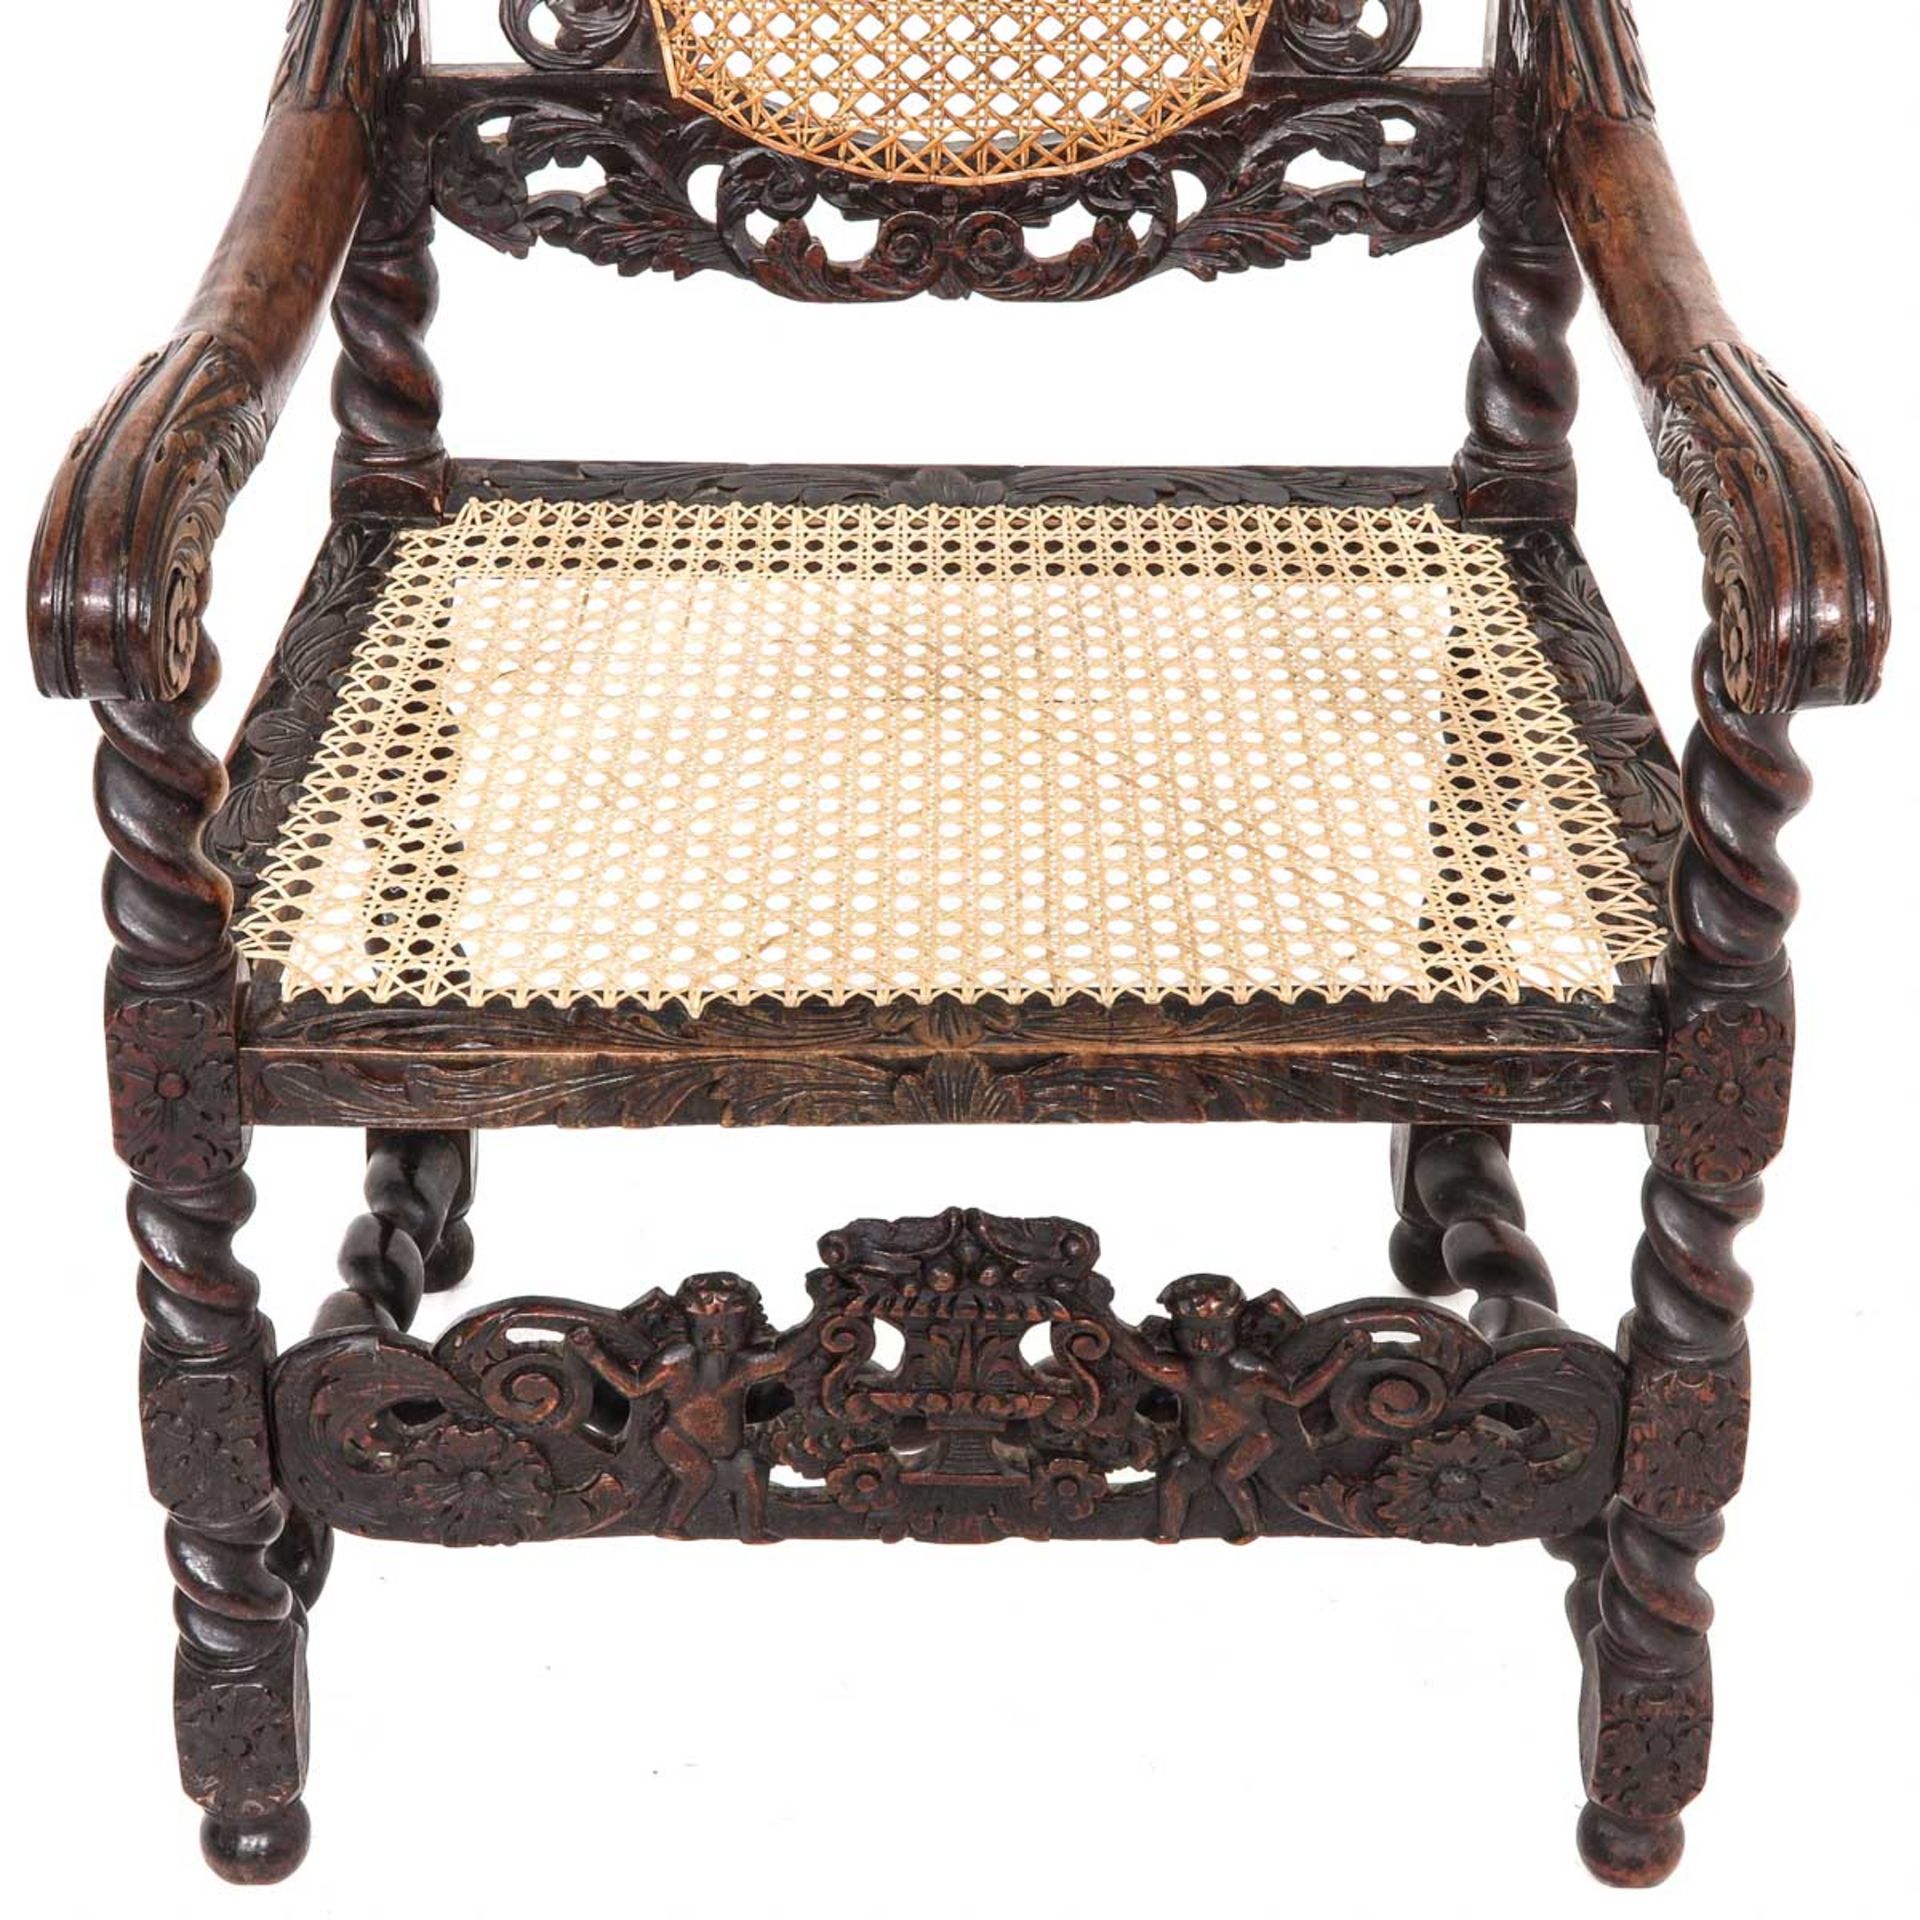 A Pair of William and Mary Chairs - Image 9 of 10